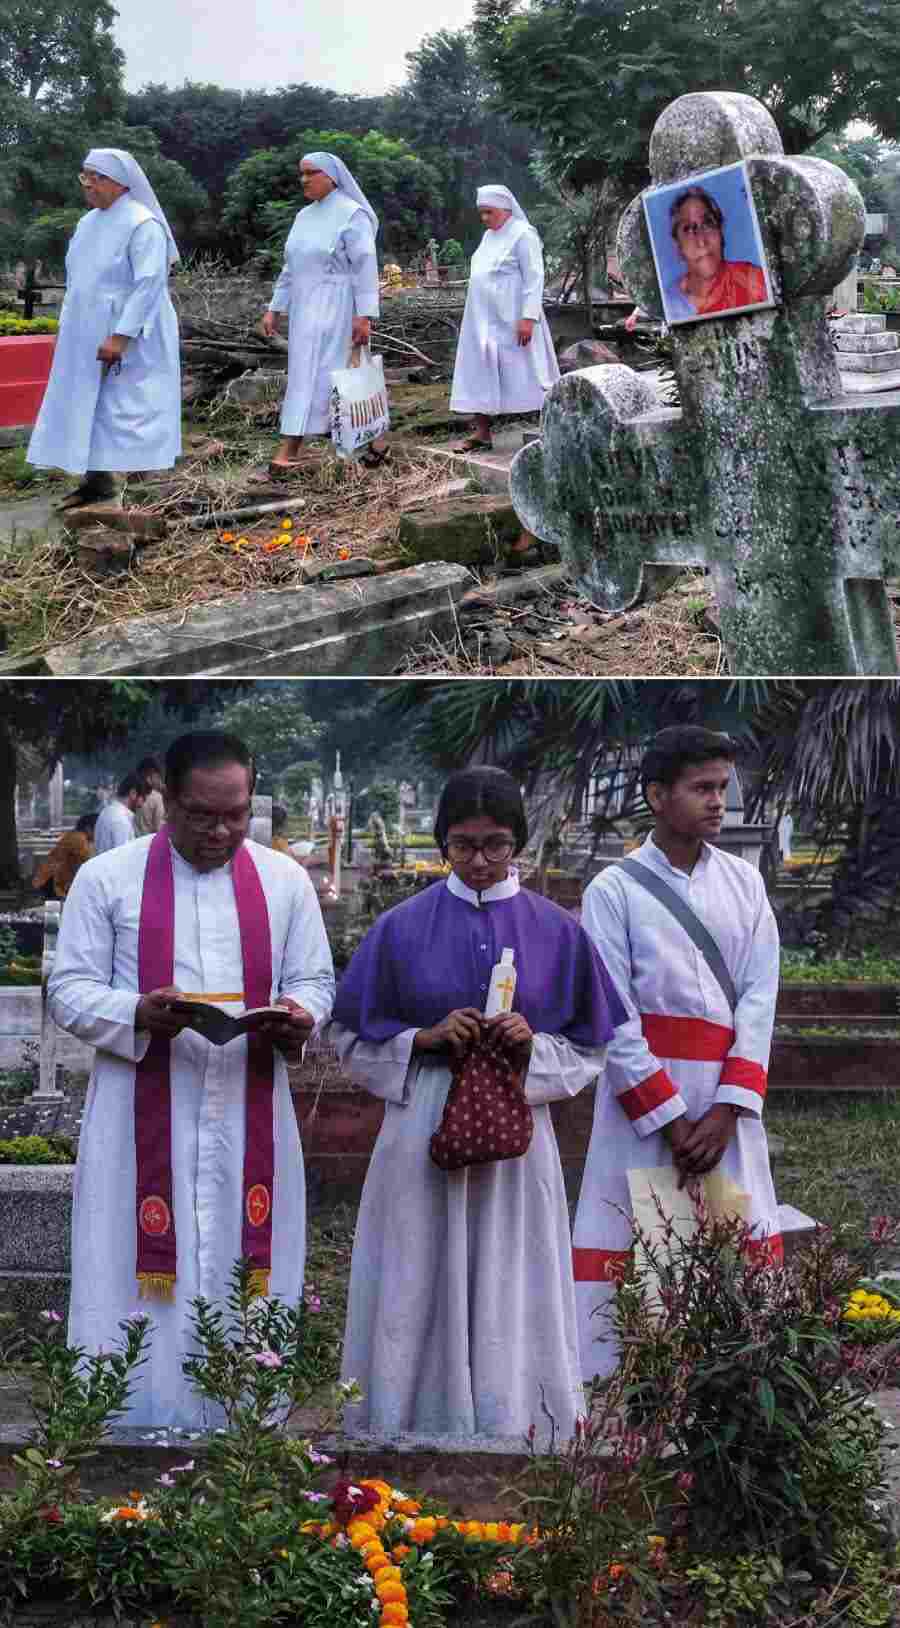 Catholic priests and nuns were seen at the Lower Circular Road Cemetery on Thursday offering prayers at graves. Ranajoy Bose, executive member of the Christian Burial Board, said: ‘The celebration in India also observes All Saints Day the previous day, November 1, when the church pastors or parish priests come and remember the saints and other pastors by offering prayers from the morning at their graves. It’s a bit like Shab-e-Barat among the Muslims and to some extent like Mahalaya among the Hindus to offer prayers to the ancestors’ 